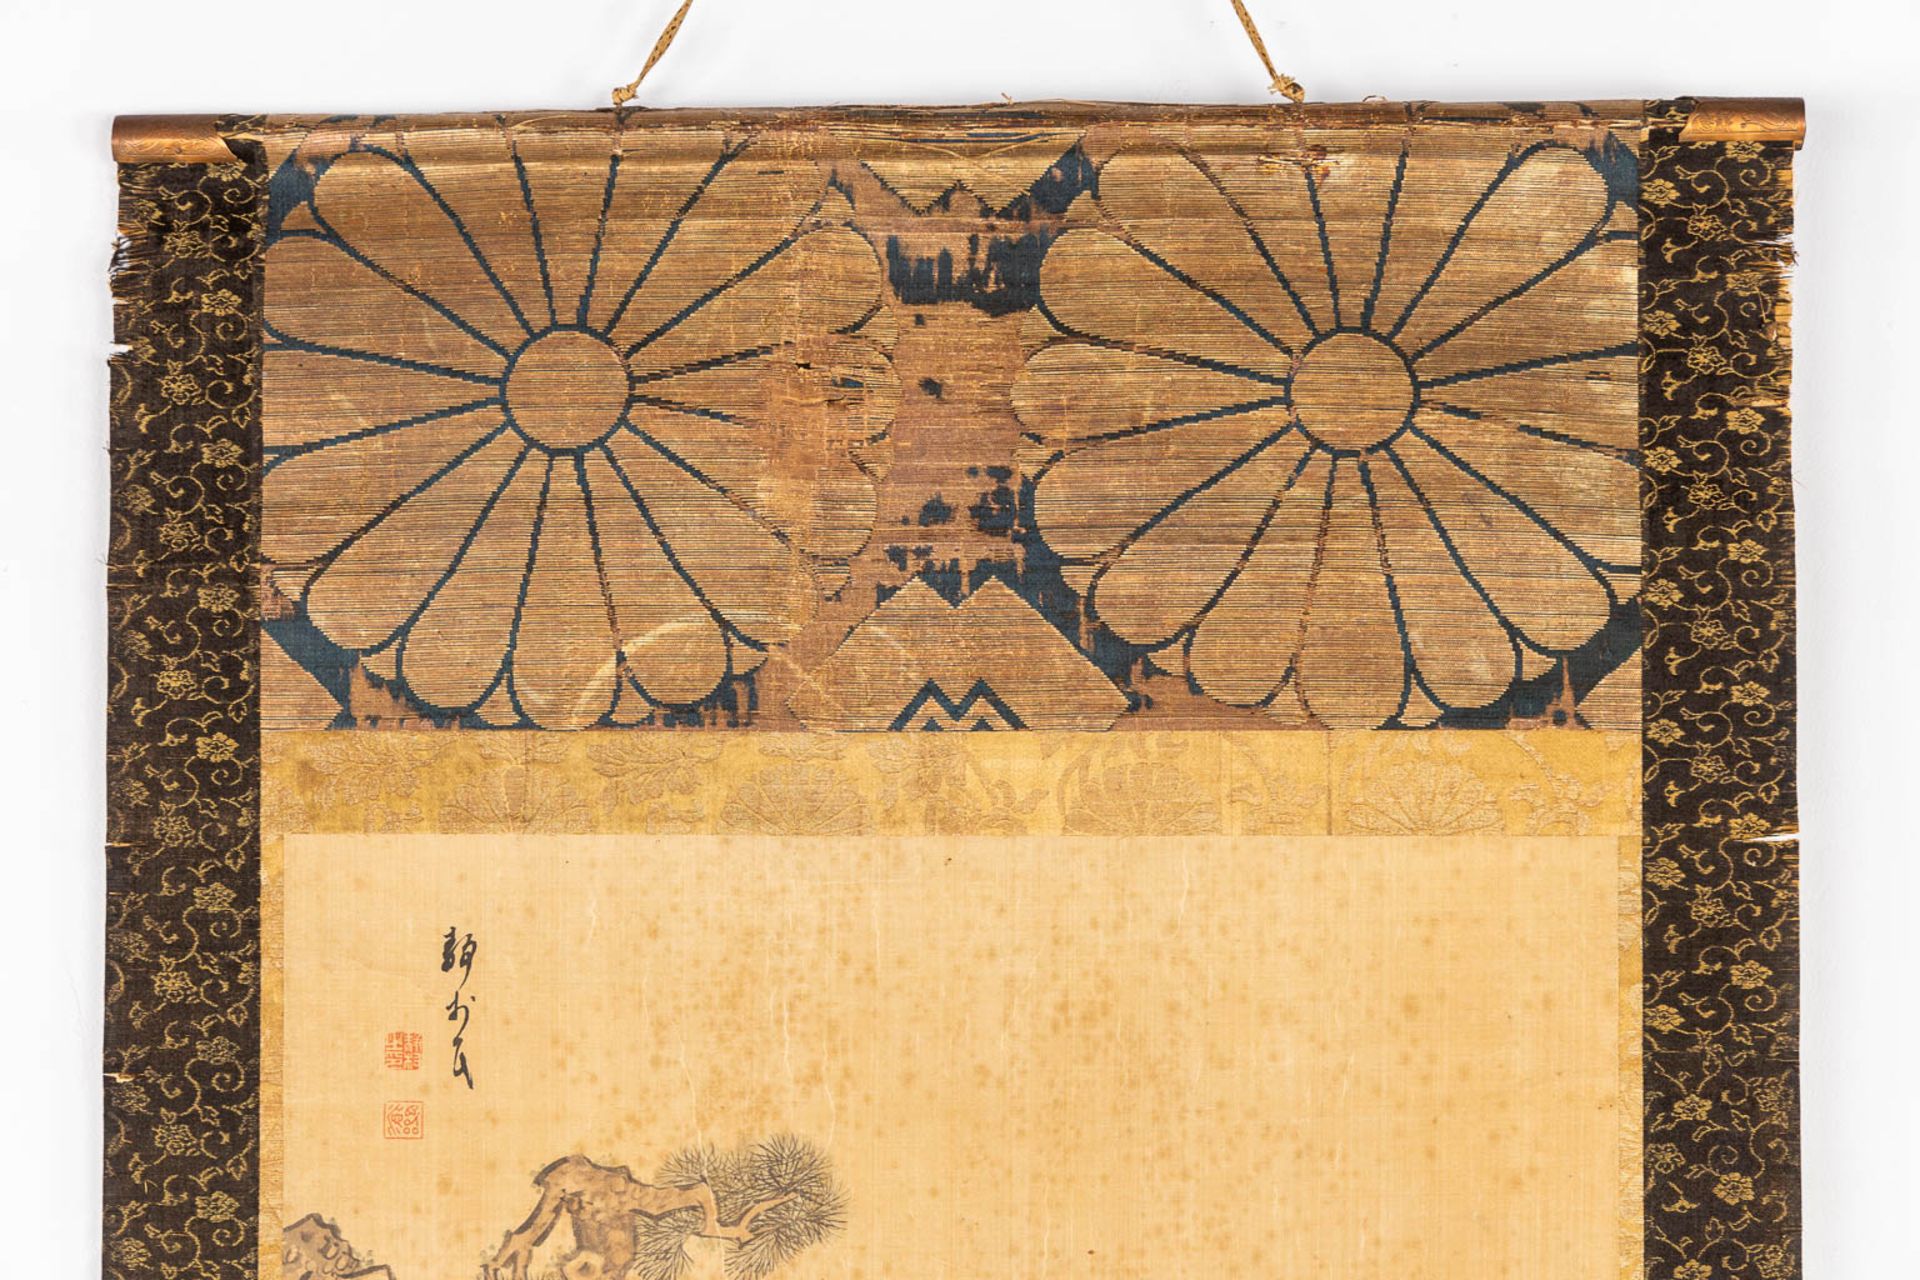 A Chinese scroll, depicting a wise man and his desciple. 19th C. (W:57 x H:180 cm) - Image 4 of 9